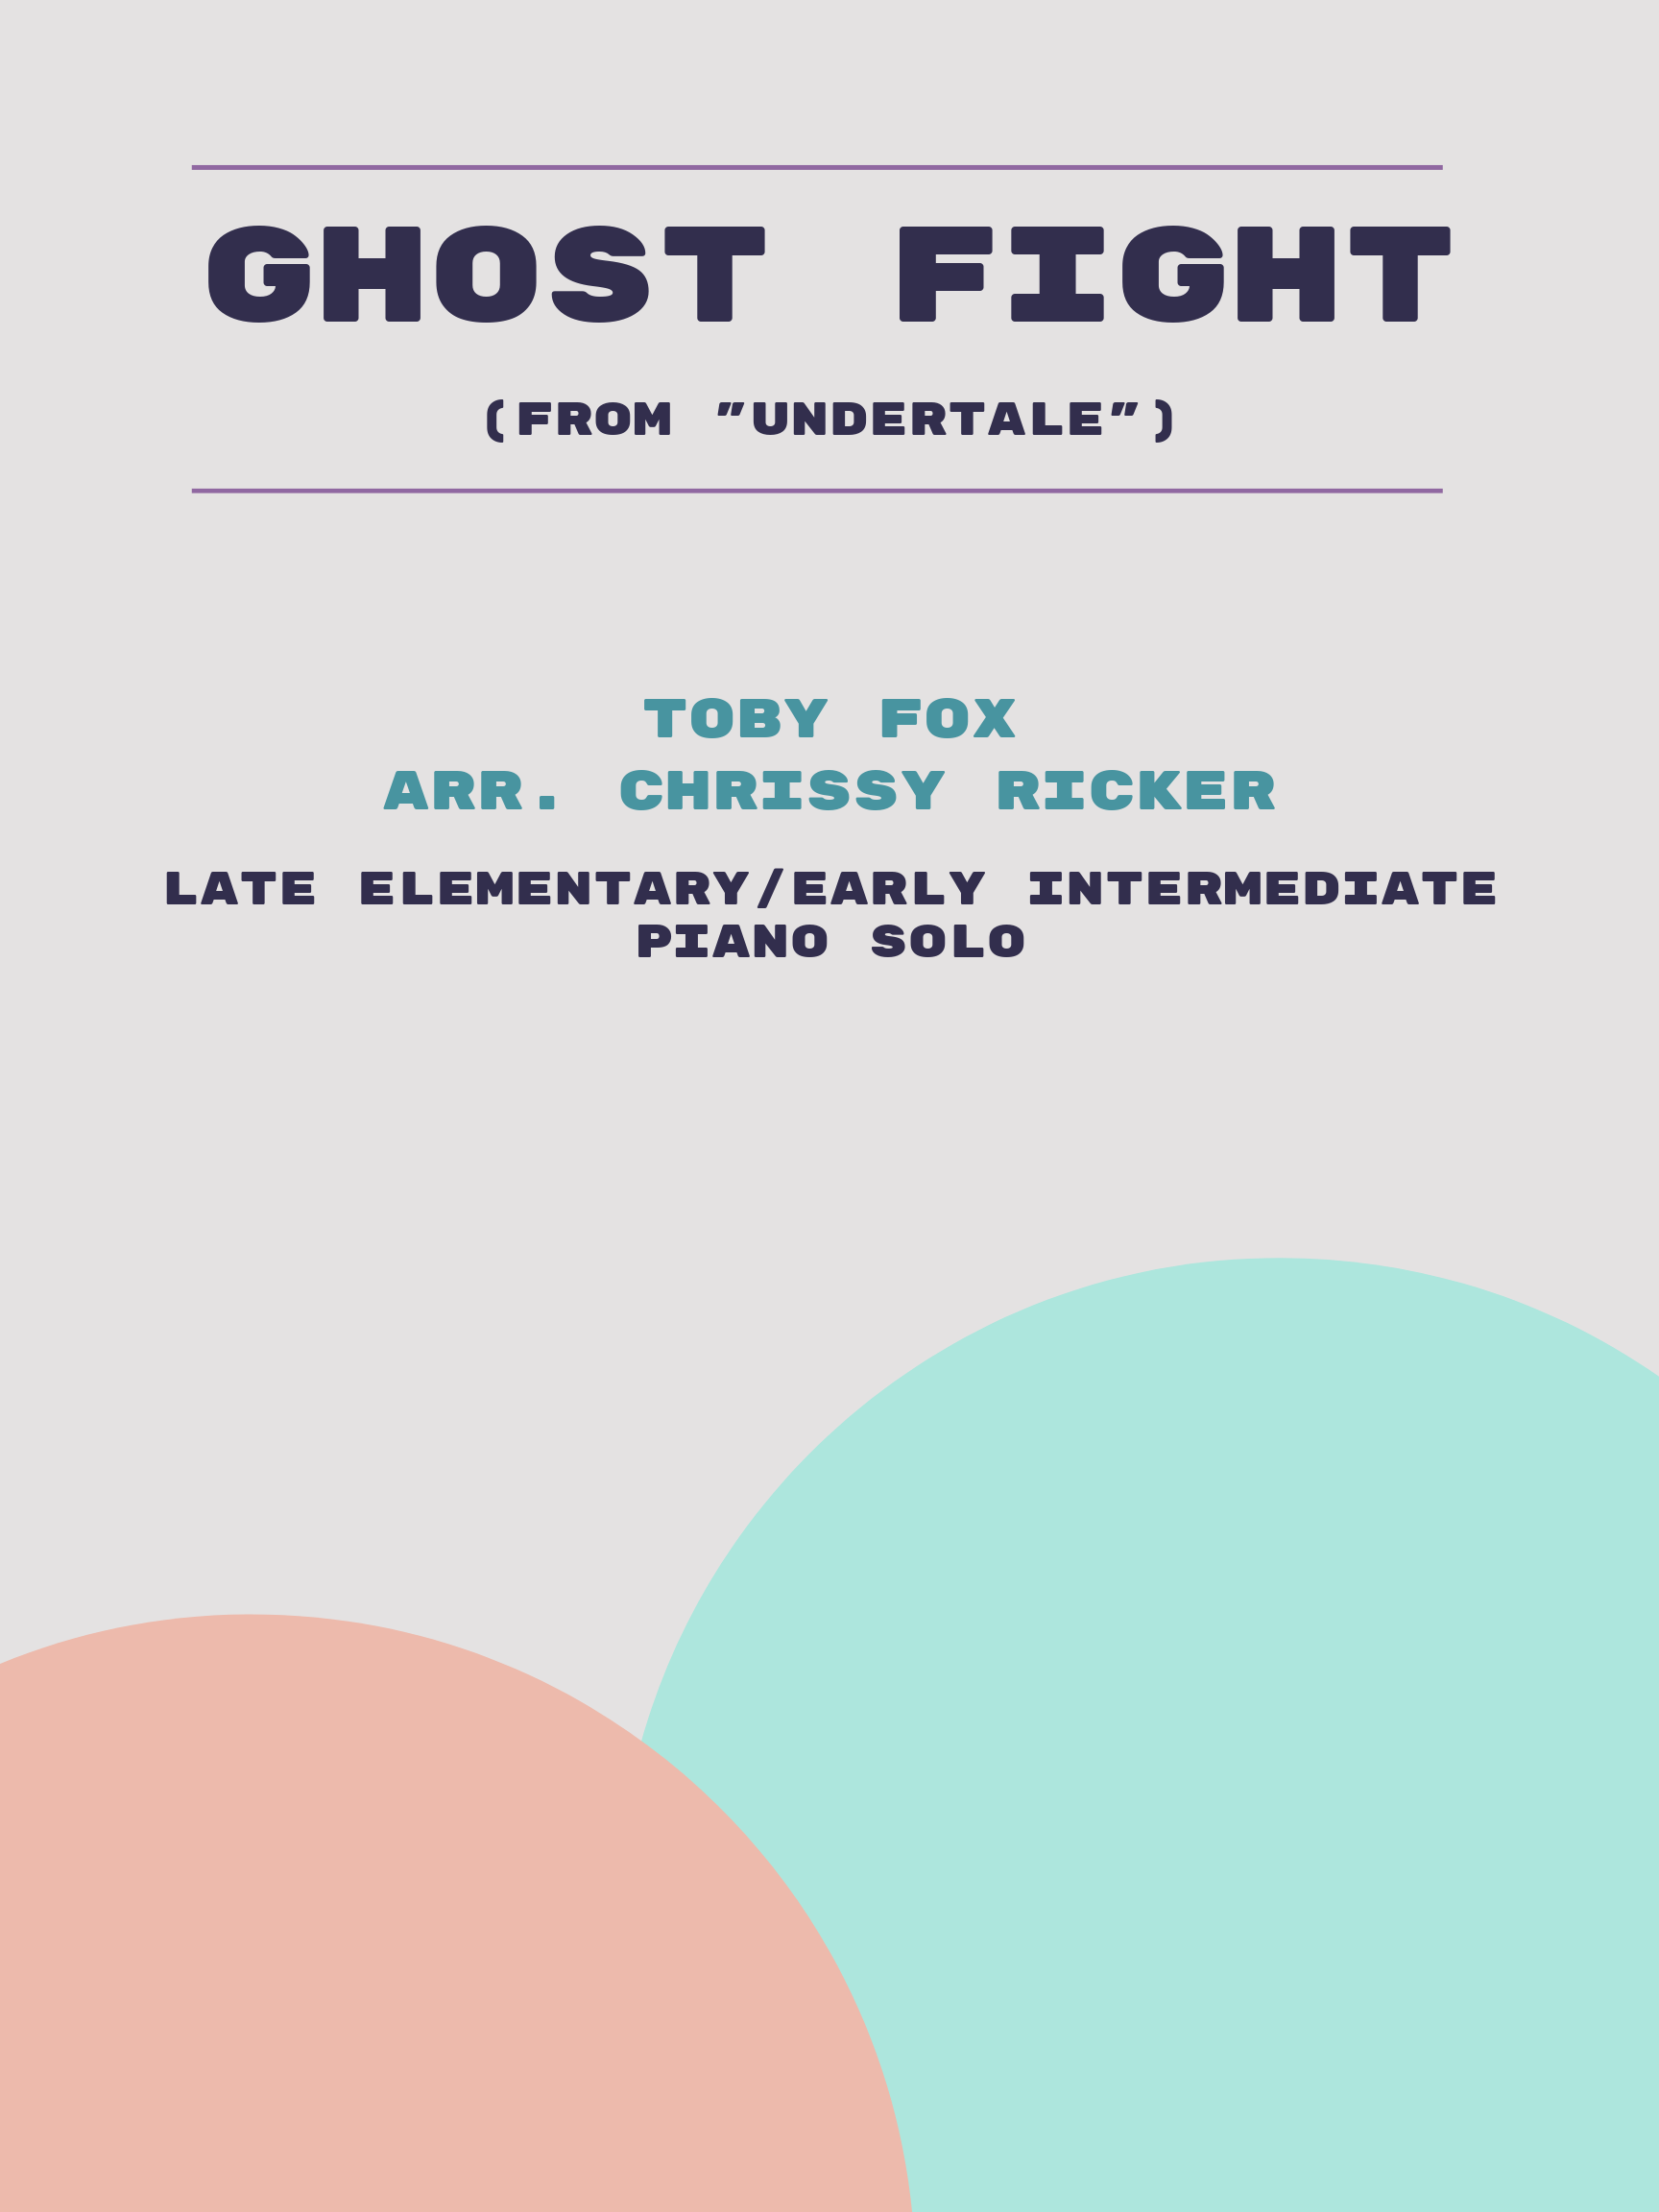 Ghost Fight by Toby Fox